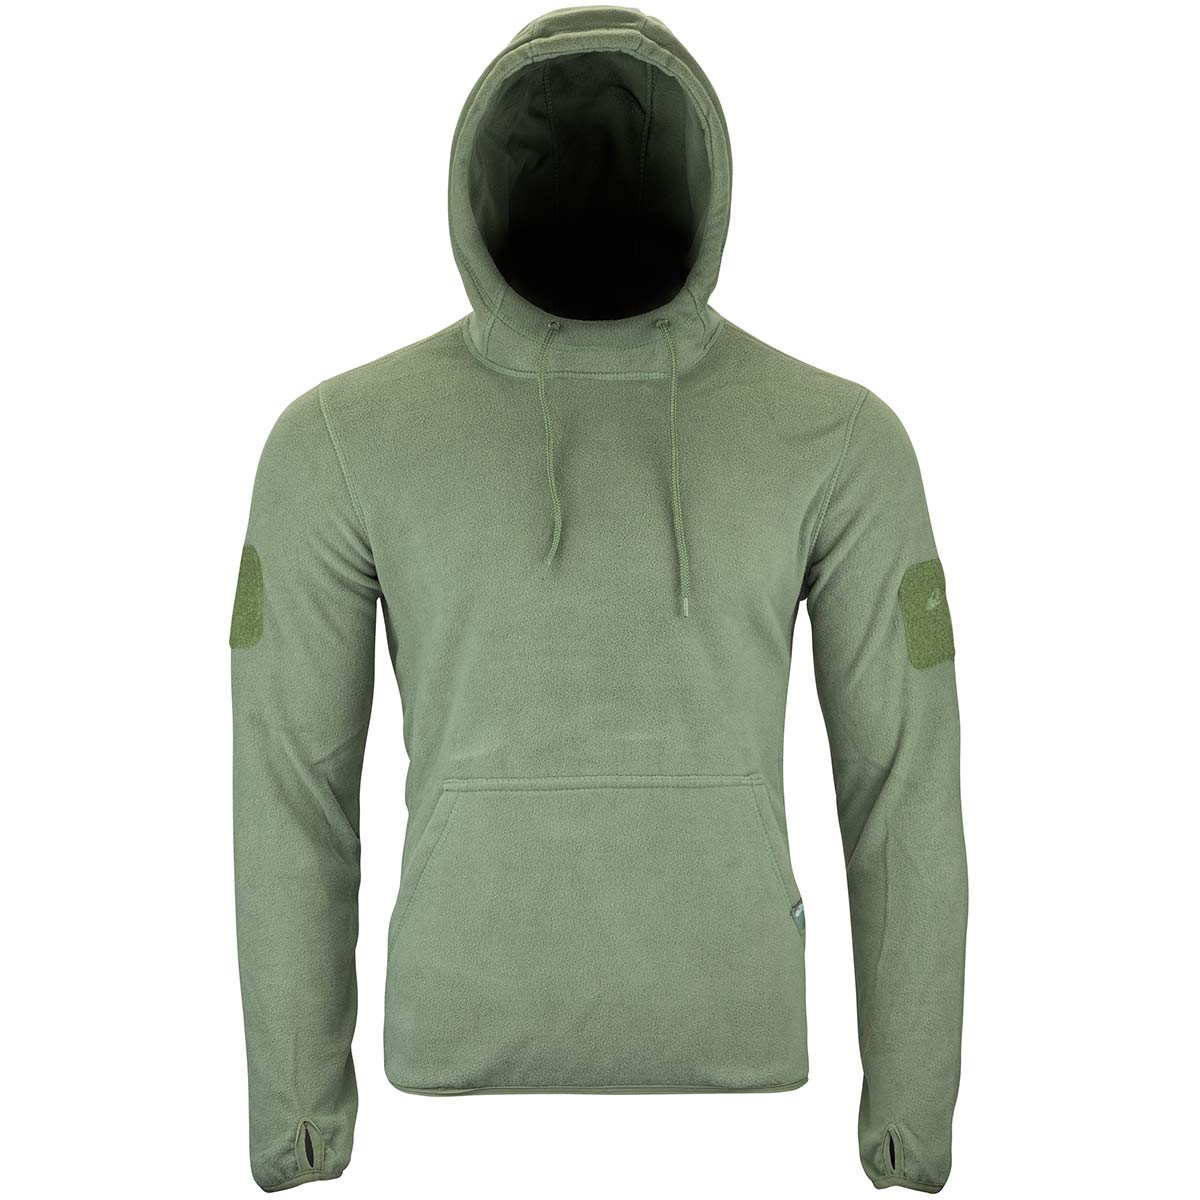 Mens Viper Tactical Fleece Hoodie Military Army Security Warm Thermal ...